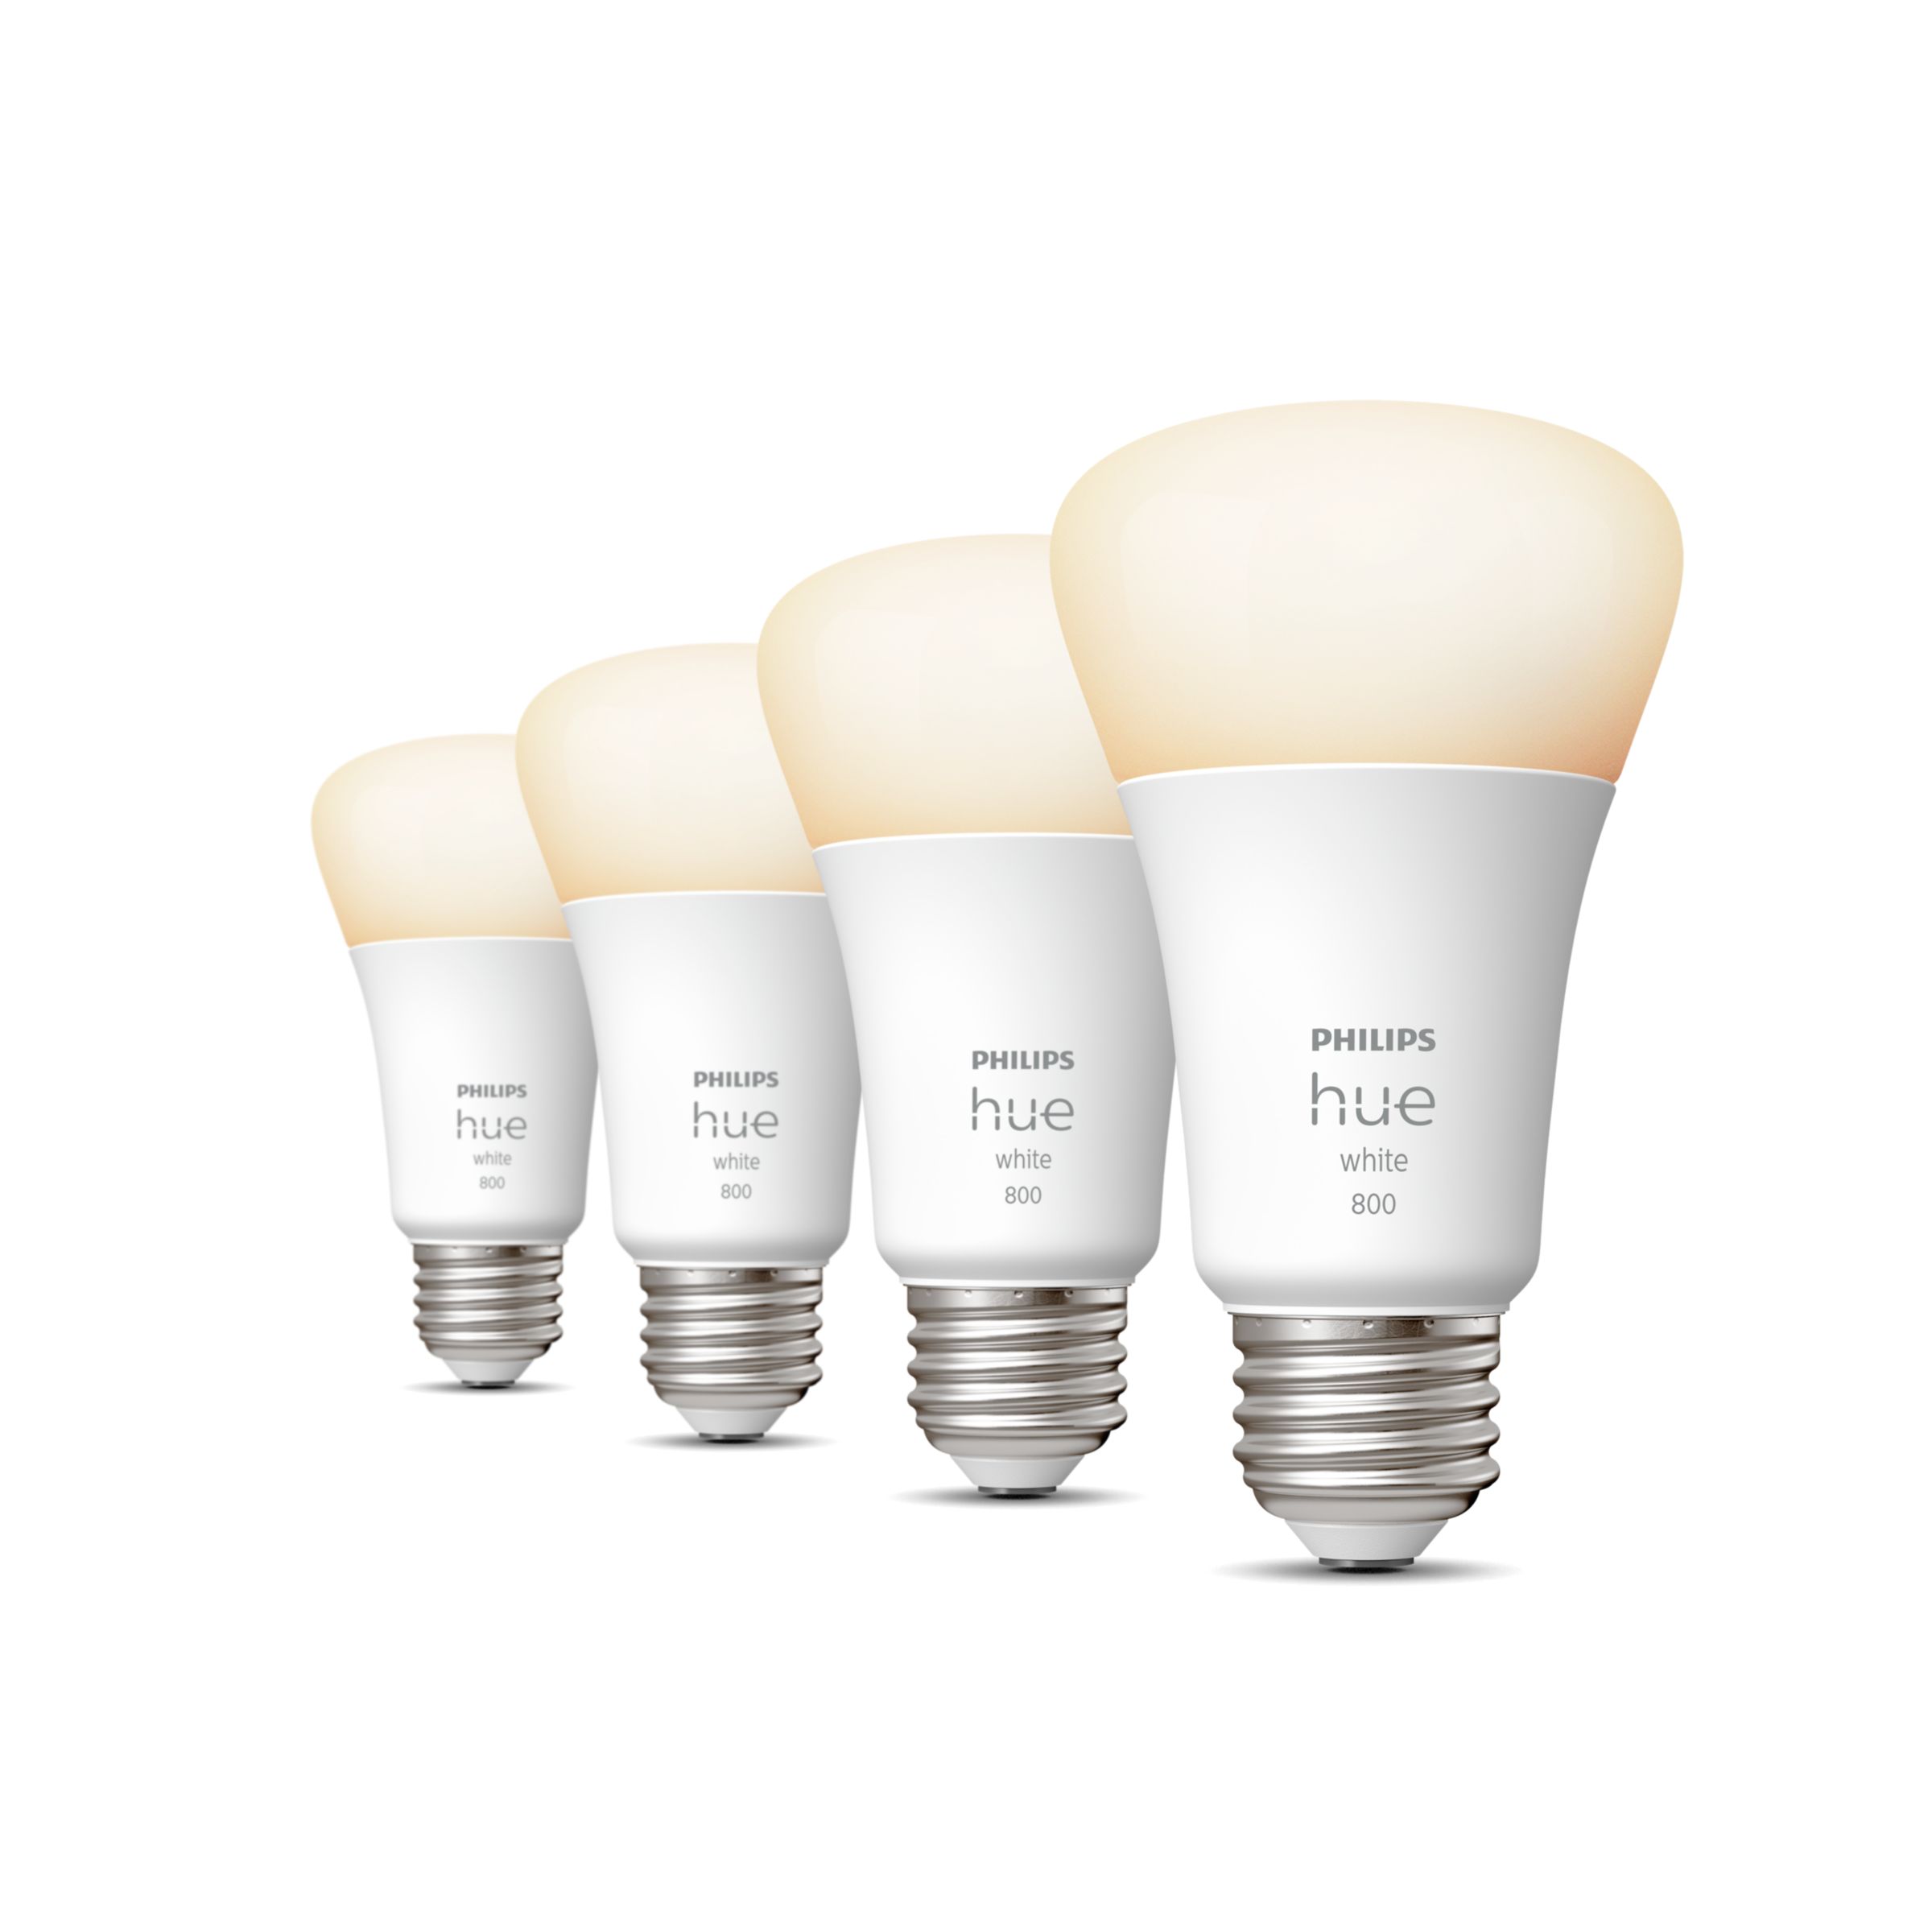 Brighter Philips Hue bulbs: How big is the difference? 